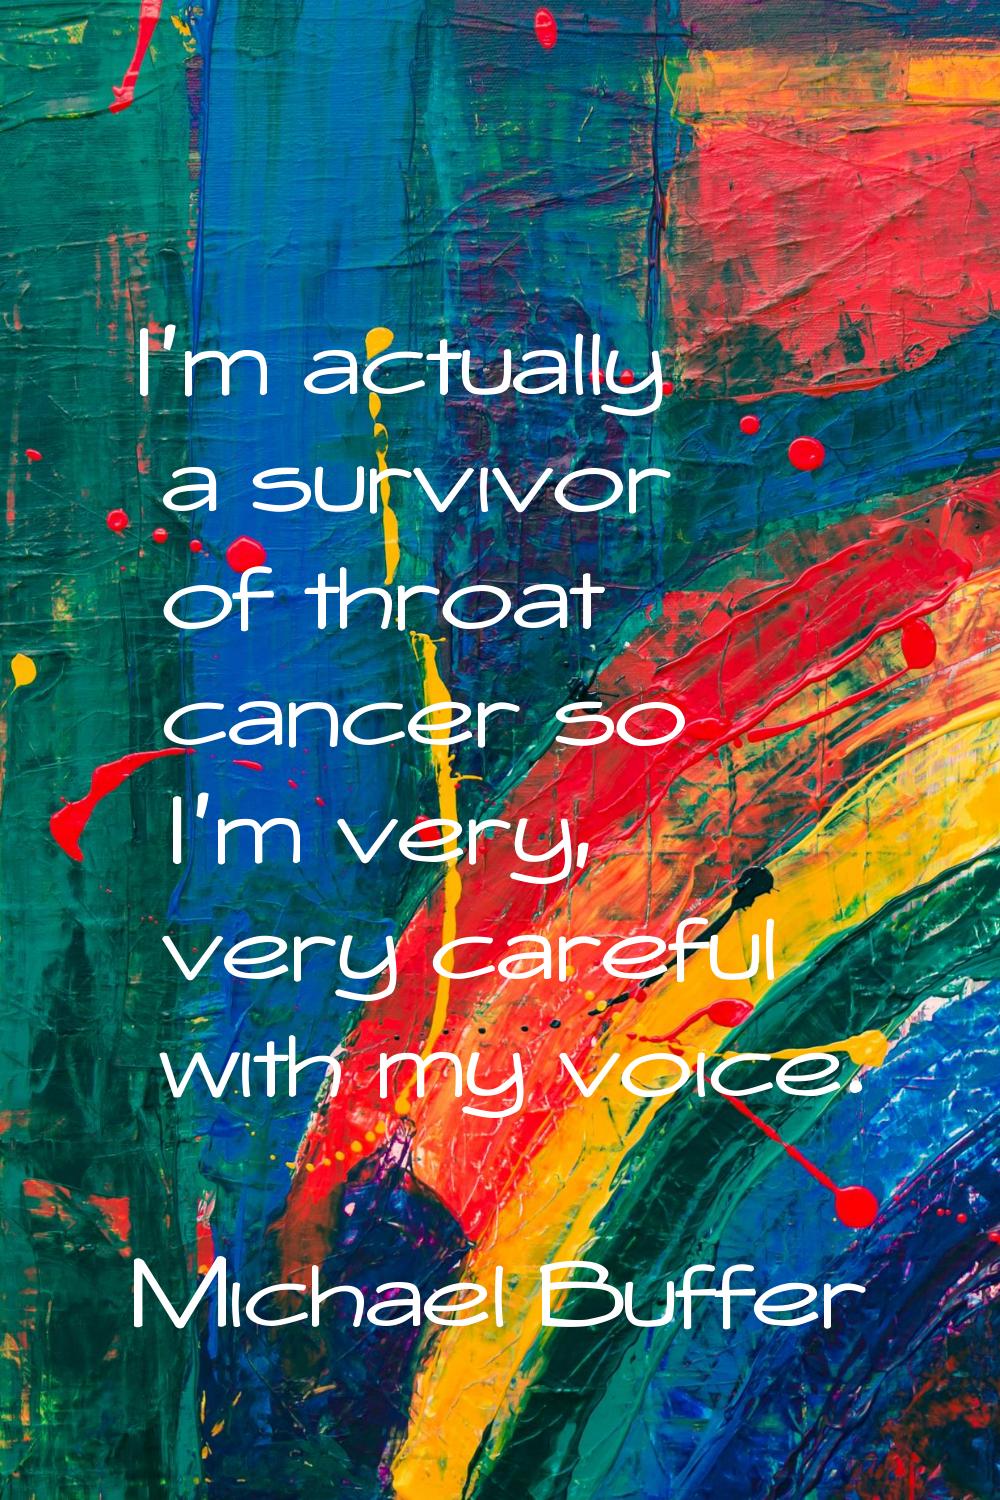 I'm actually a survivor of throat cancer so I'm very, very careful with my voice.